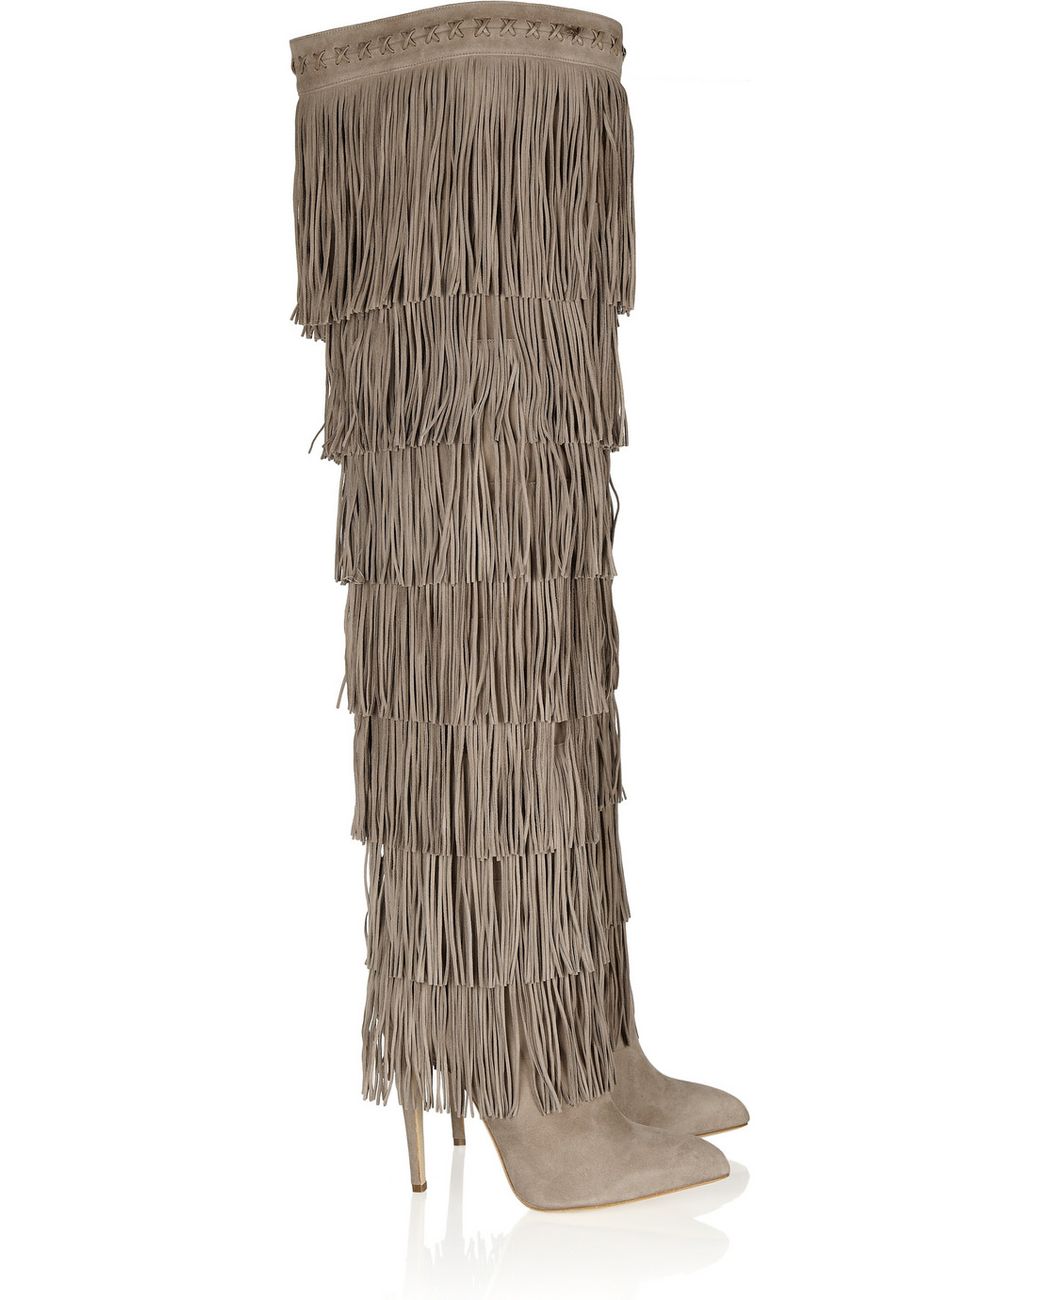 Brian Atwood Viva Tiered Fringed Suede Boots in Natural | Lyst